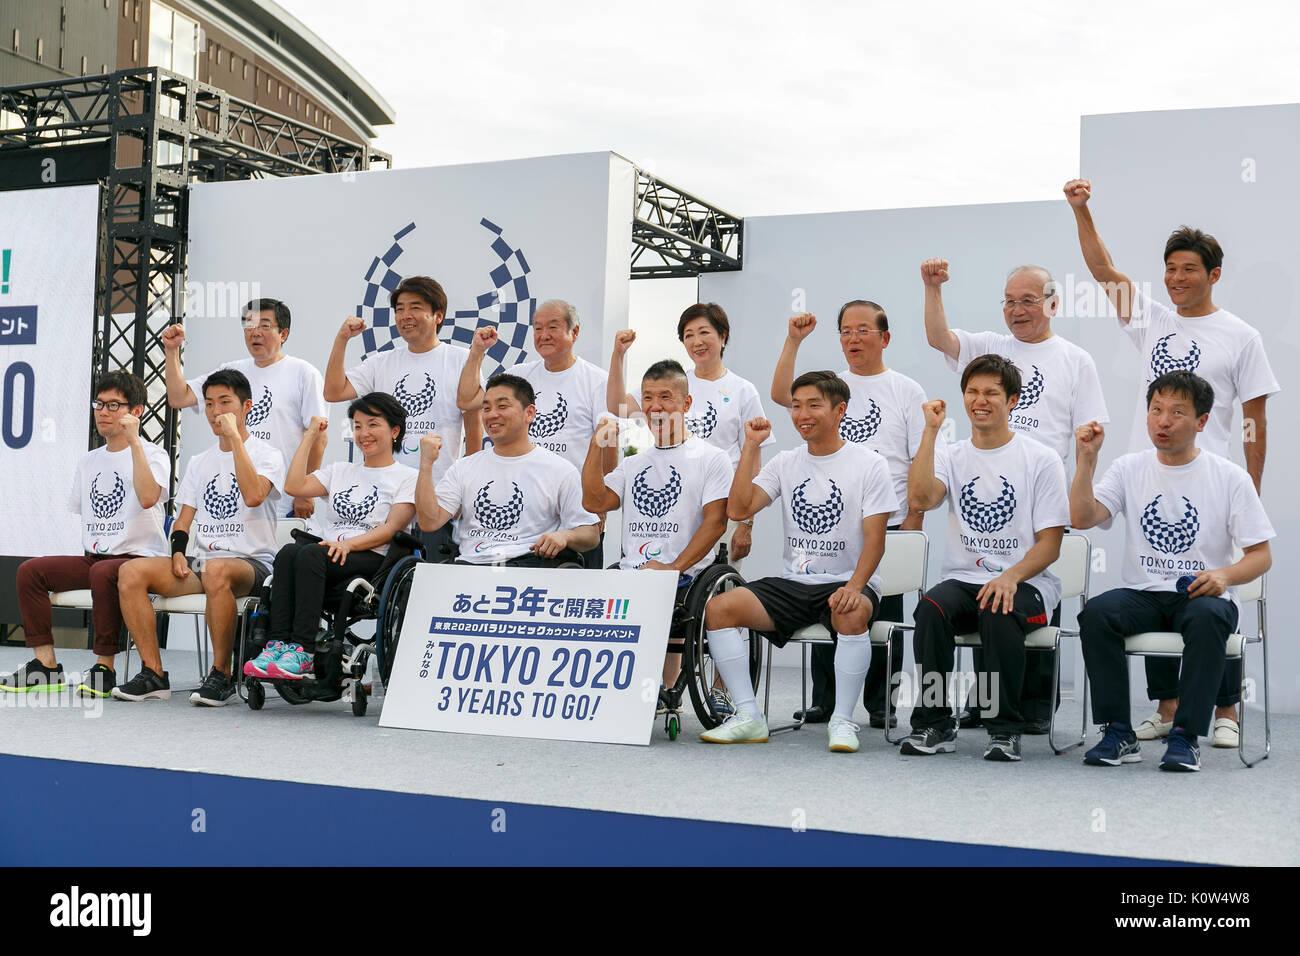 Tokyo governor Yuriko Koike (C) alongside organizers and Paralympians pose for the cameras during the 3 Years to Go! ceremony for the Tokyo 2020 Paralympic games at Urban Dock LaLaport Toyosu on August 25, 2017. The Games are set to start on August 25th 2020. (Photo by Rodrigo Reyes Marin/AFLO) Stock Photo